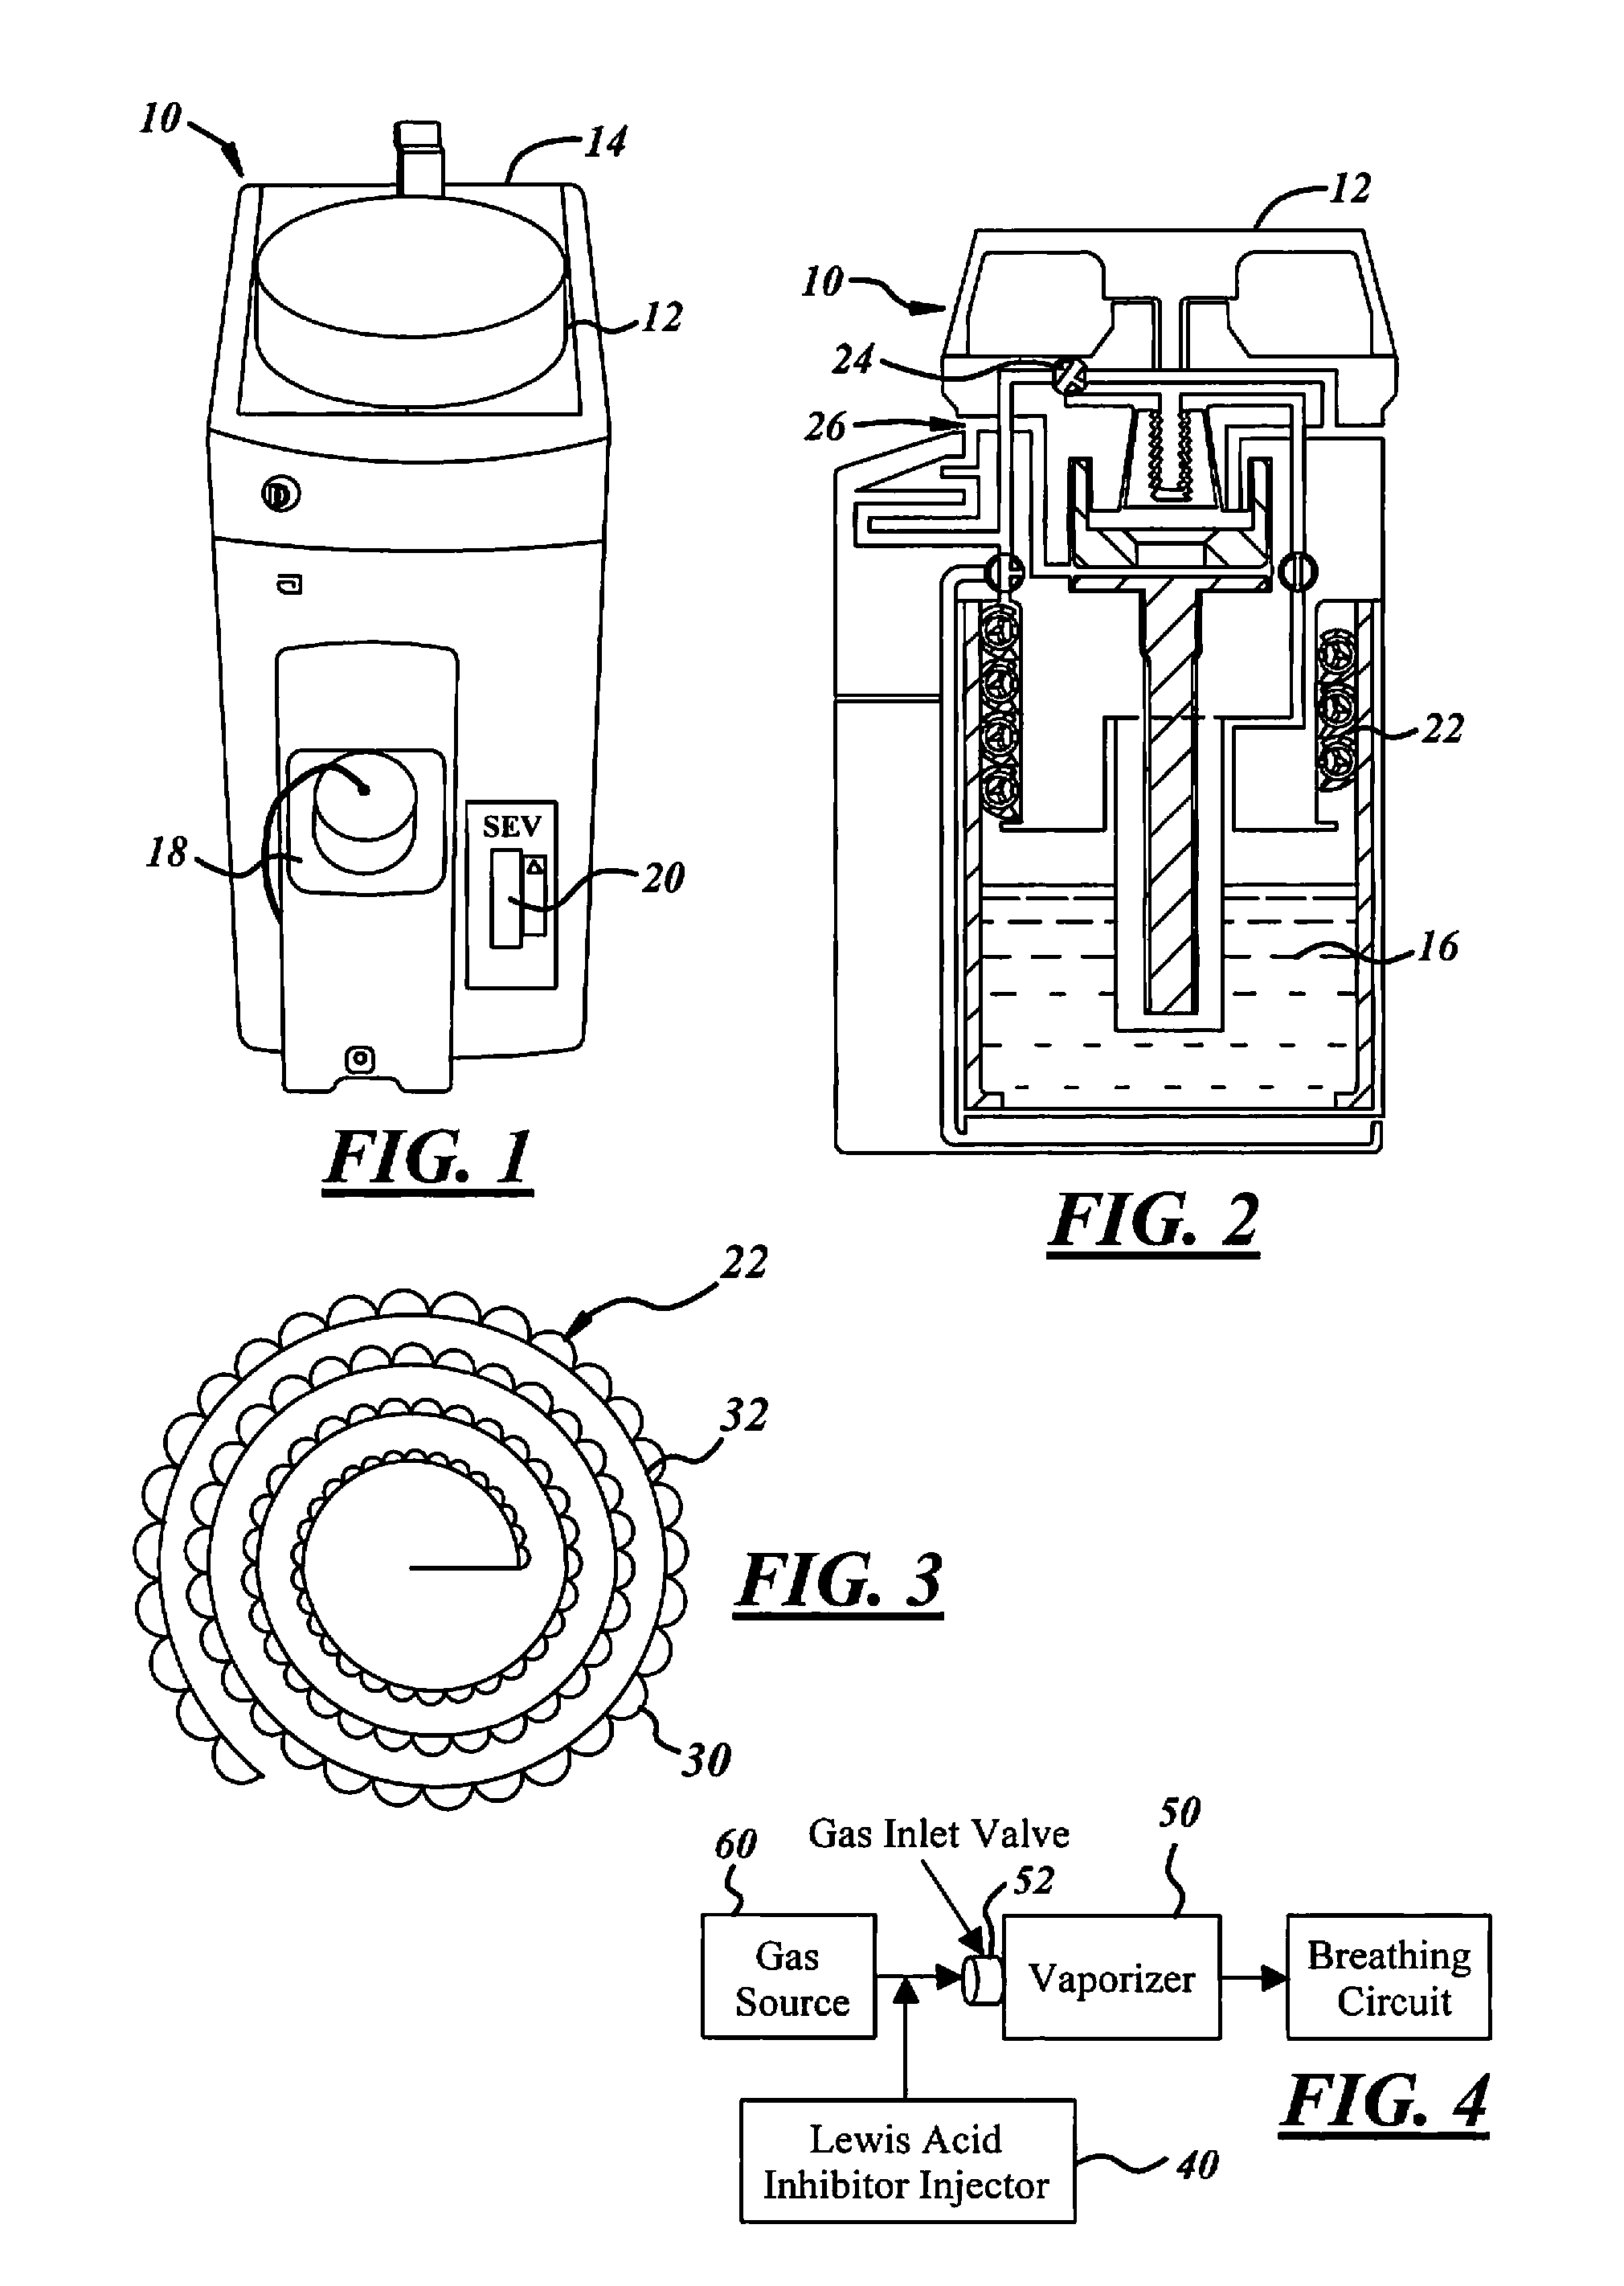 Apparatus for and related method of inhibiting lewis acid degradation in a vaporizer